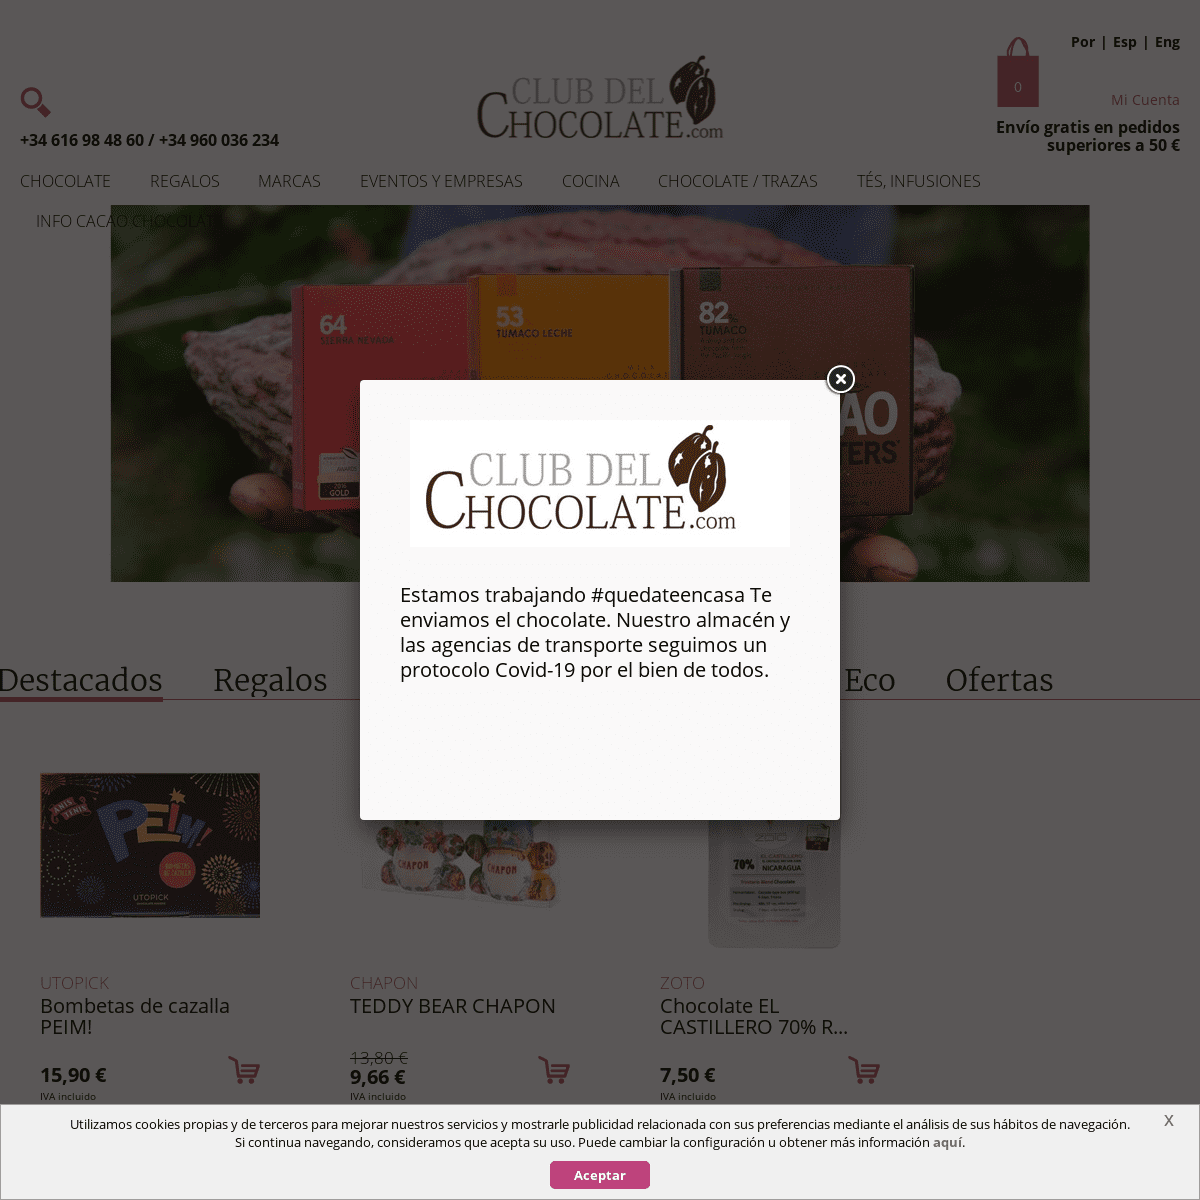 A complete backup of clubdelchocolate.com